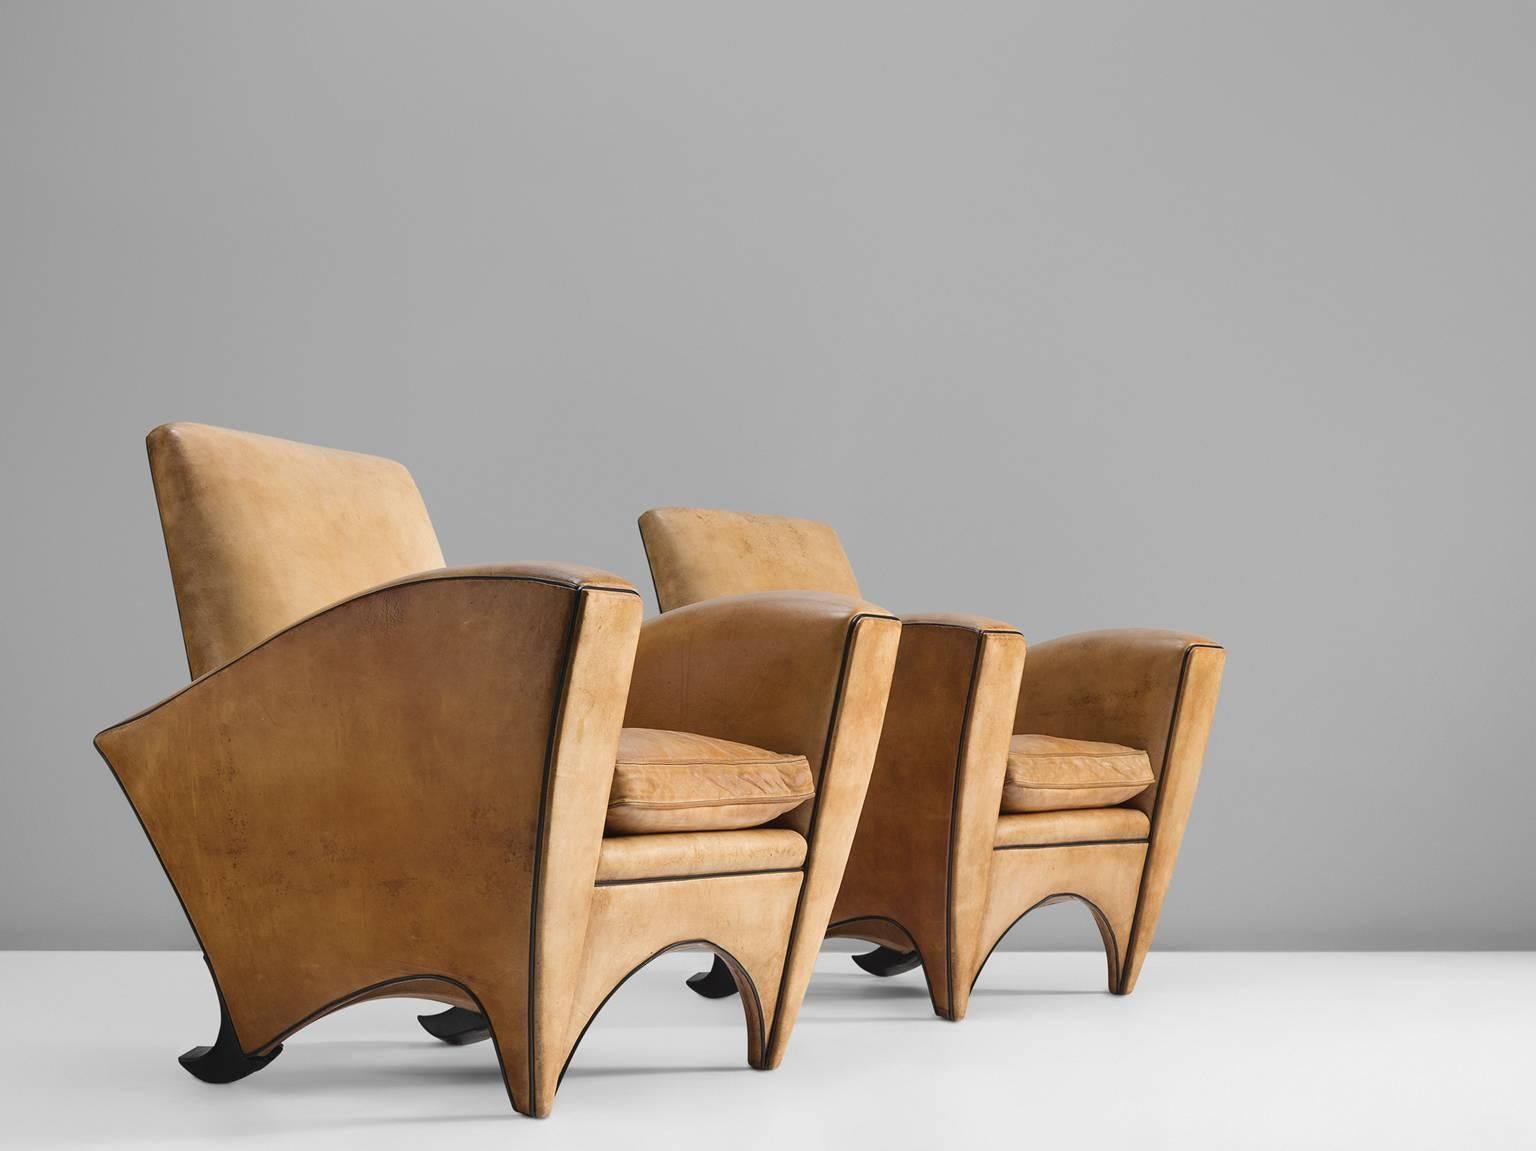 Cognac club chairs, in cognac leather with black leather piping and wood, Europe, 1970s.

This set of club chairs in cognac leather with black piping have very original and strong appearances. The sturdy design features interesting curved feet that